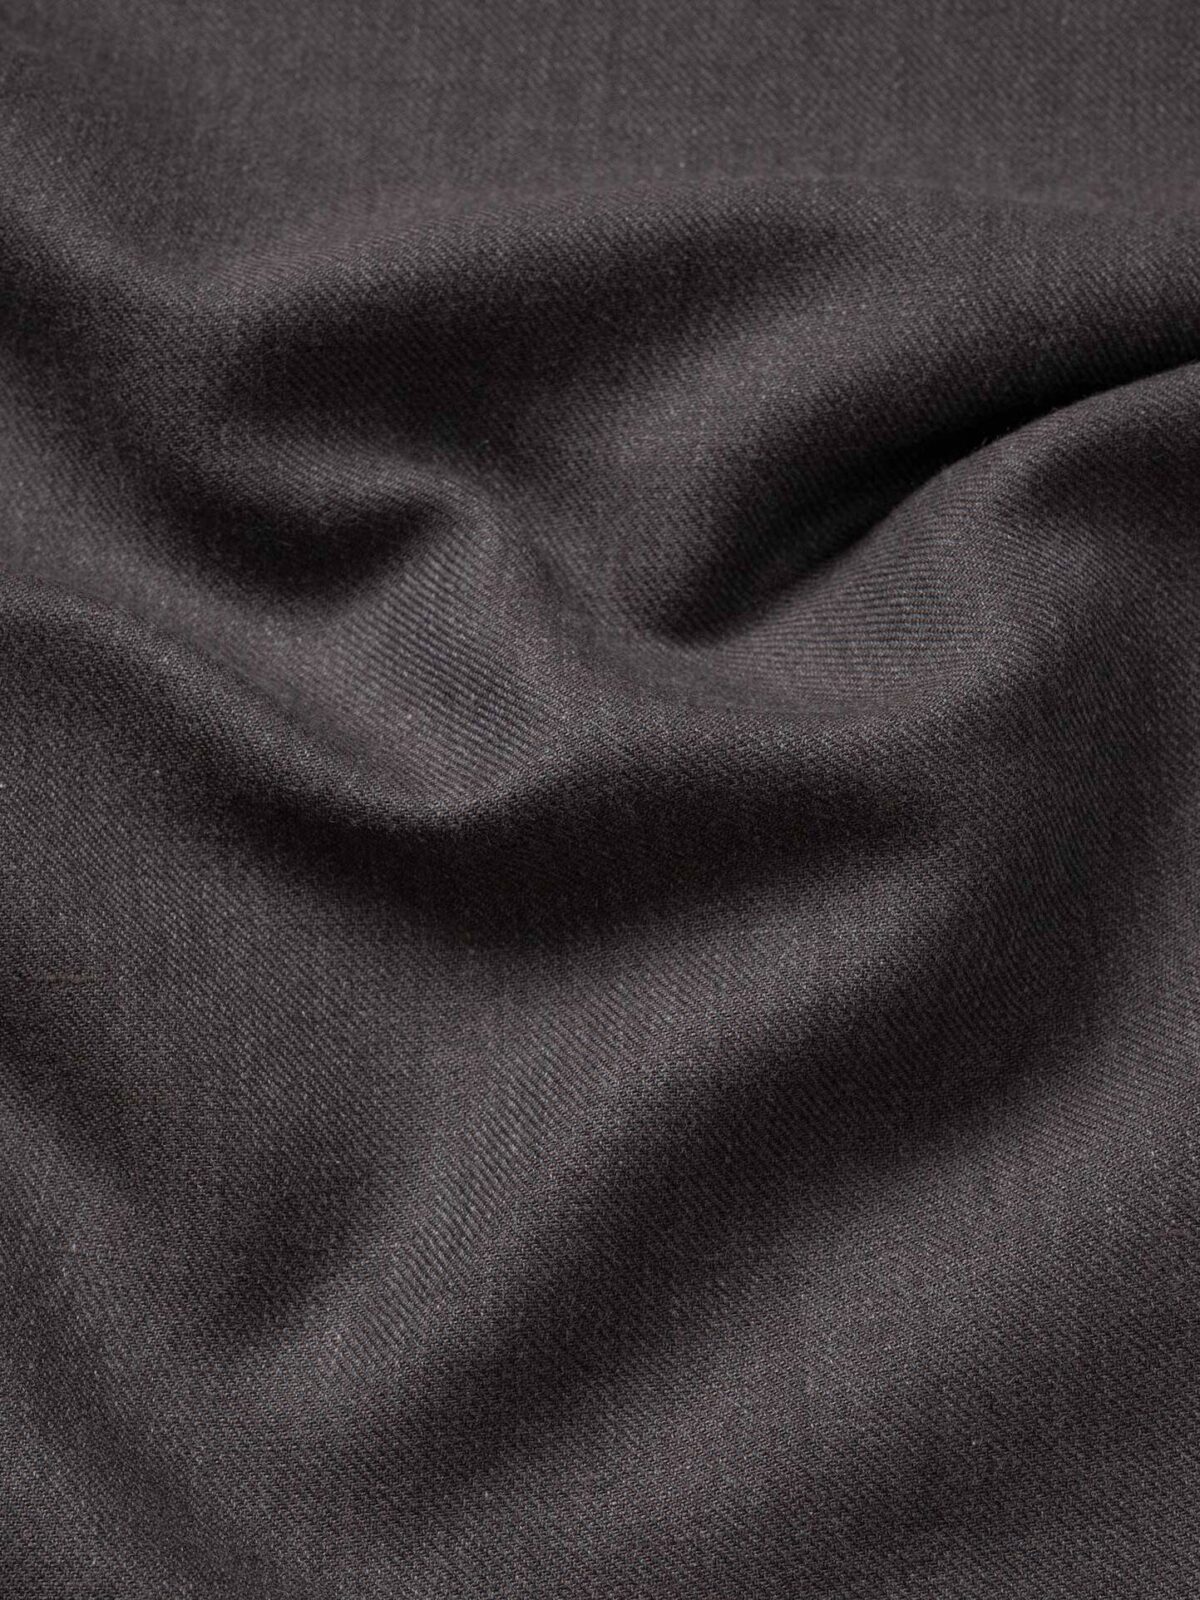 Sun Washed Faded Black Cotton and Linen Twill Shirts by Proper Cloth